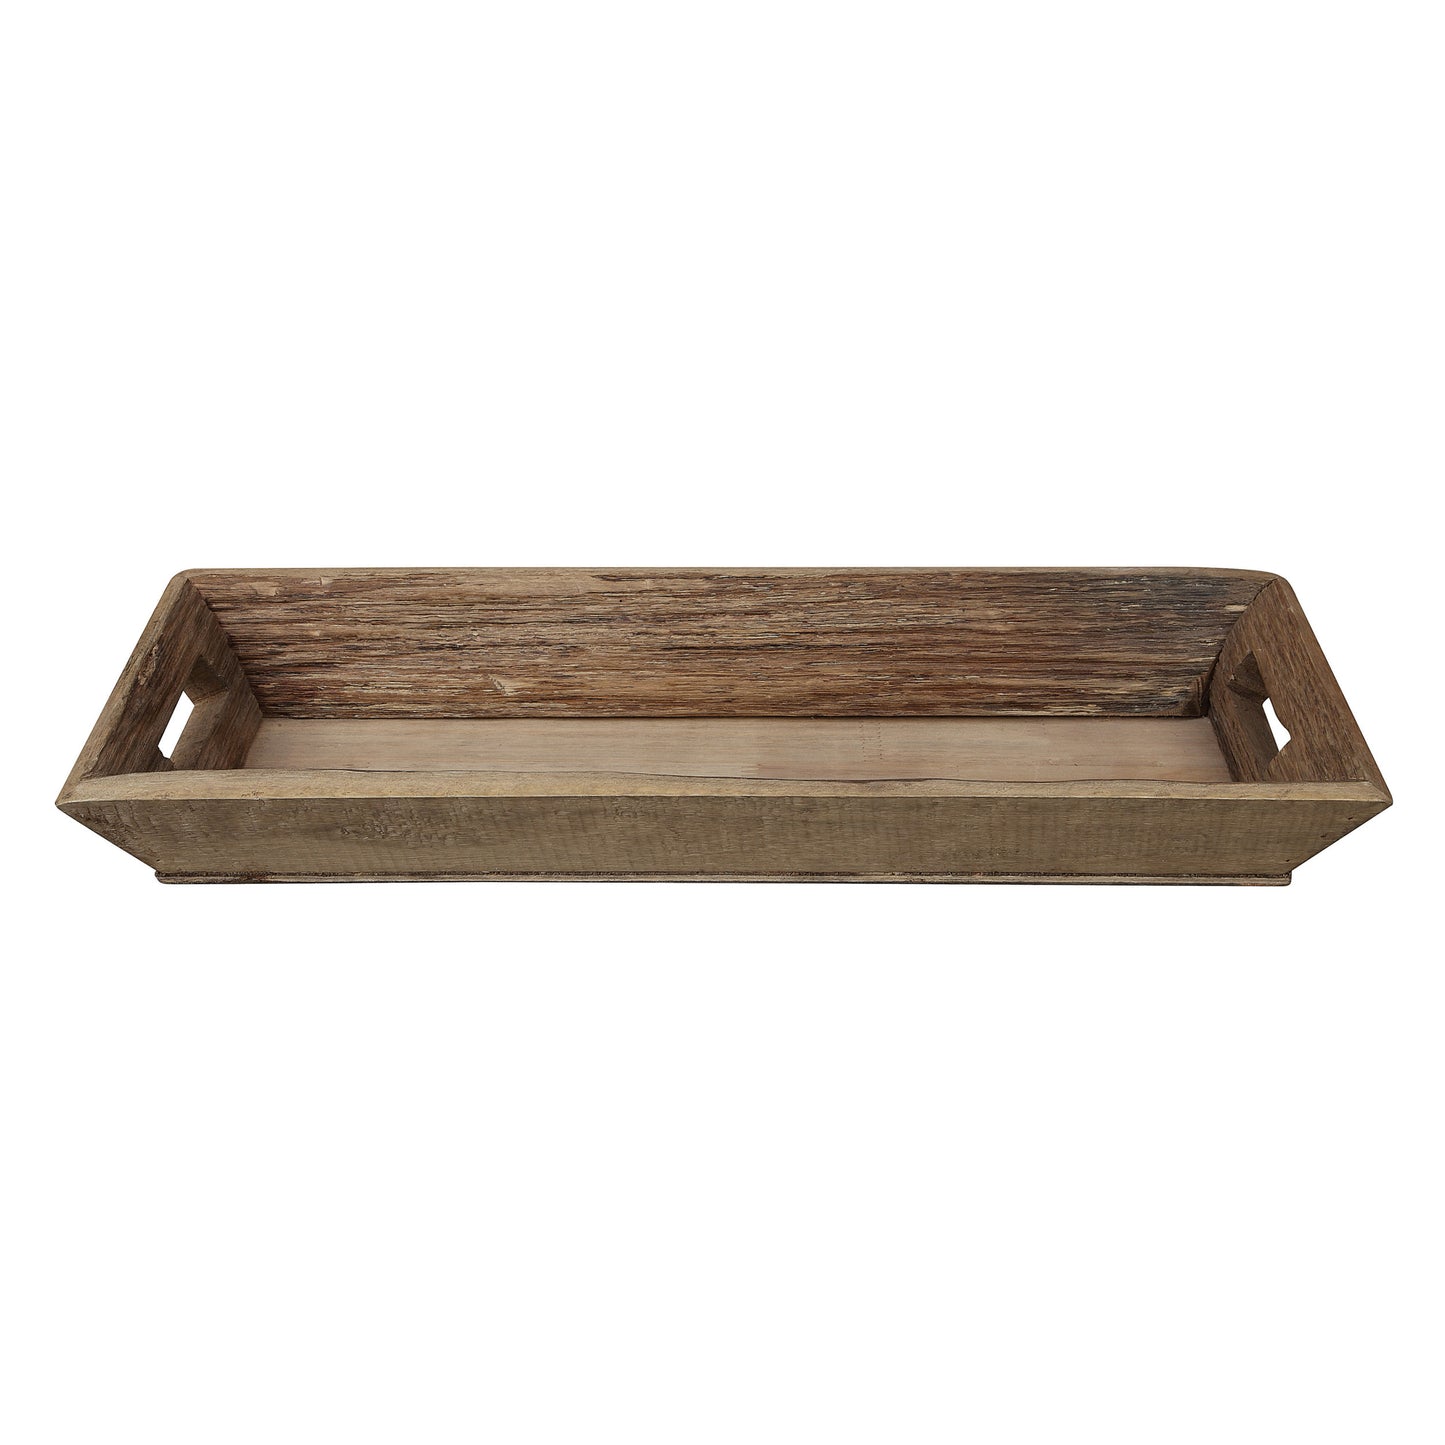 Decorative Wood Tray with Handles